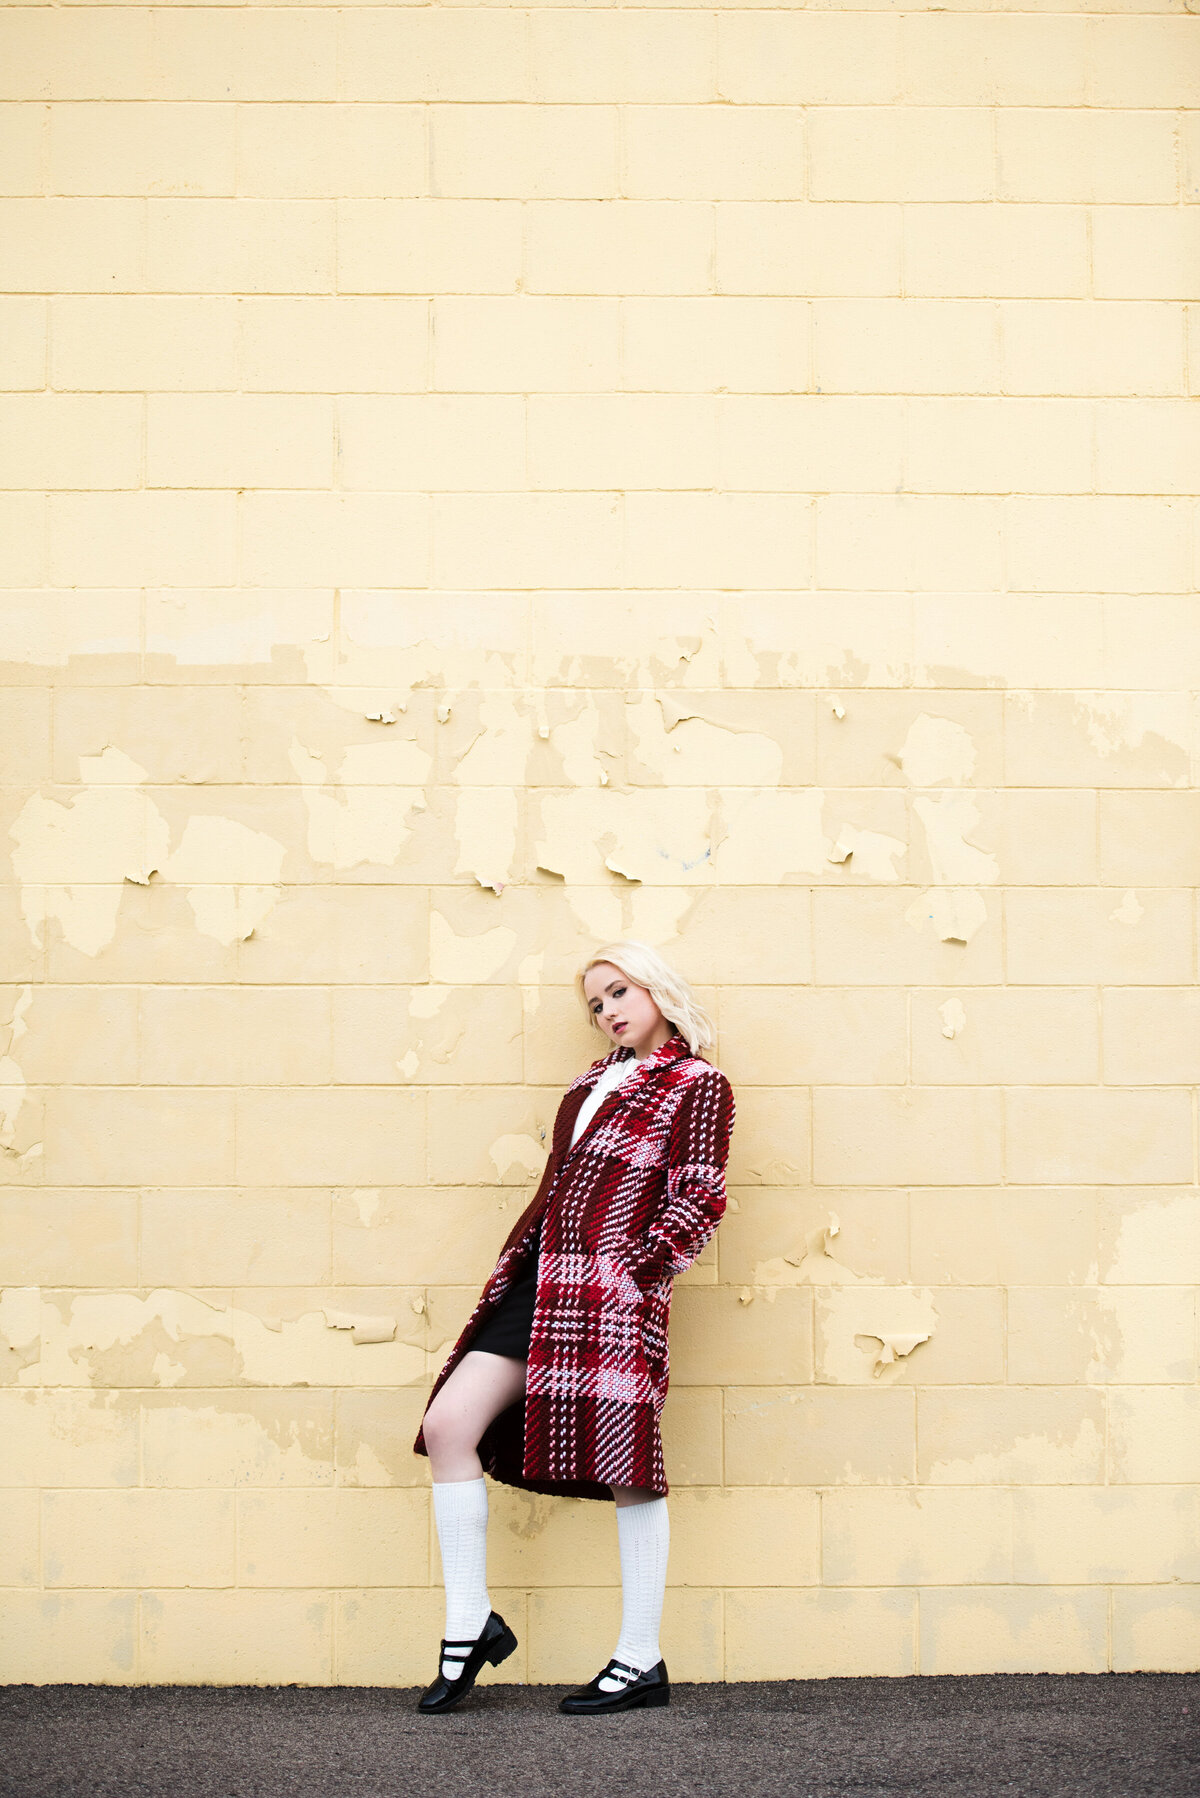 high school senior girl in plaid jacket leaning against yellow wall